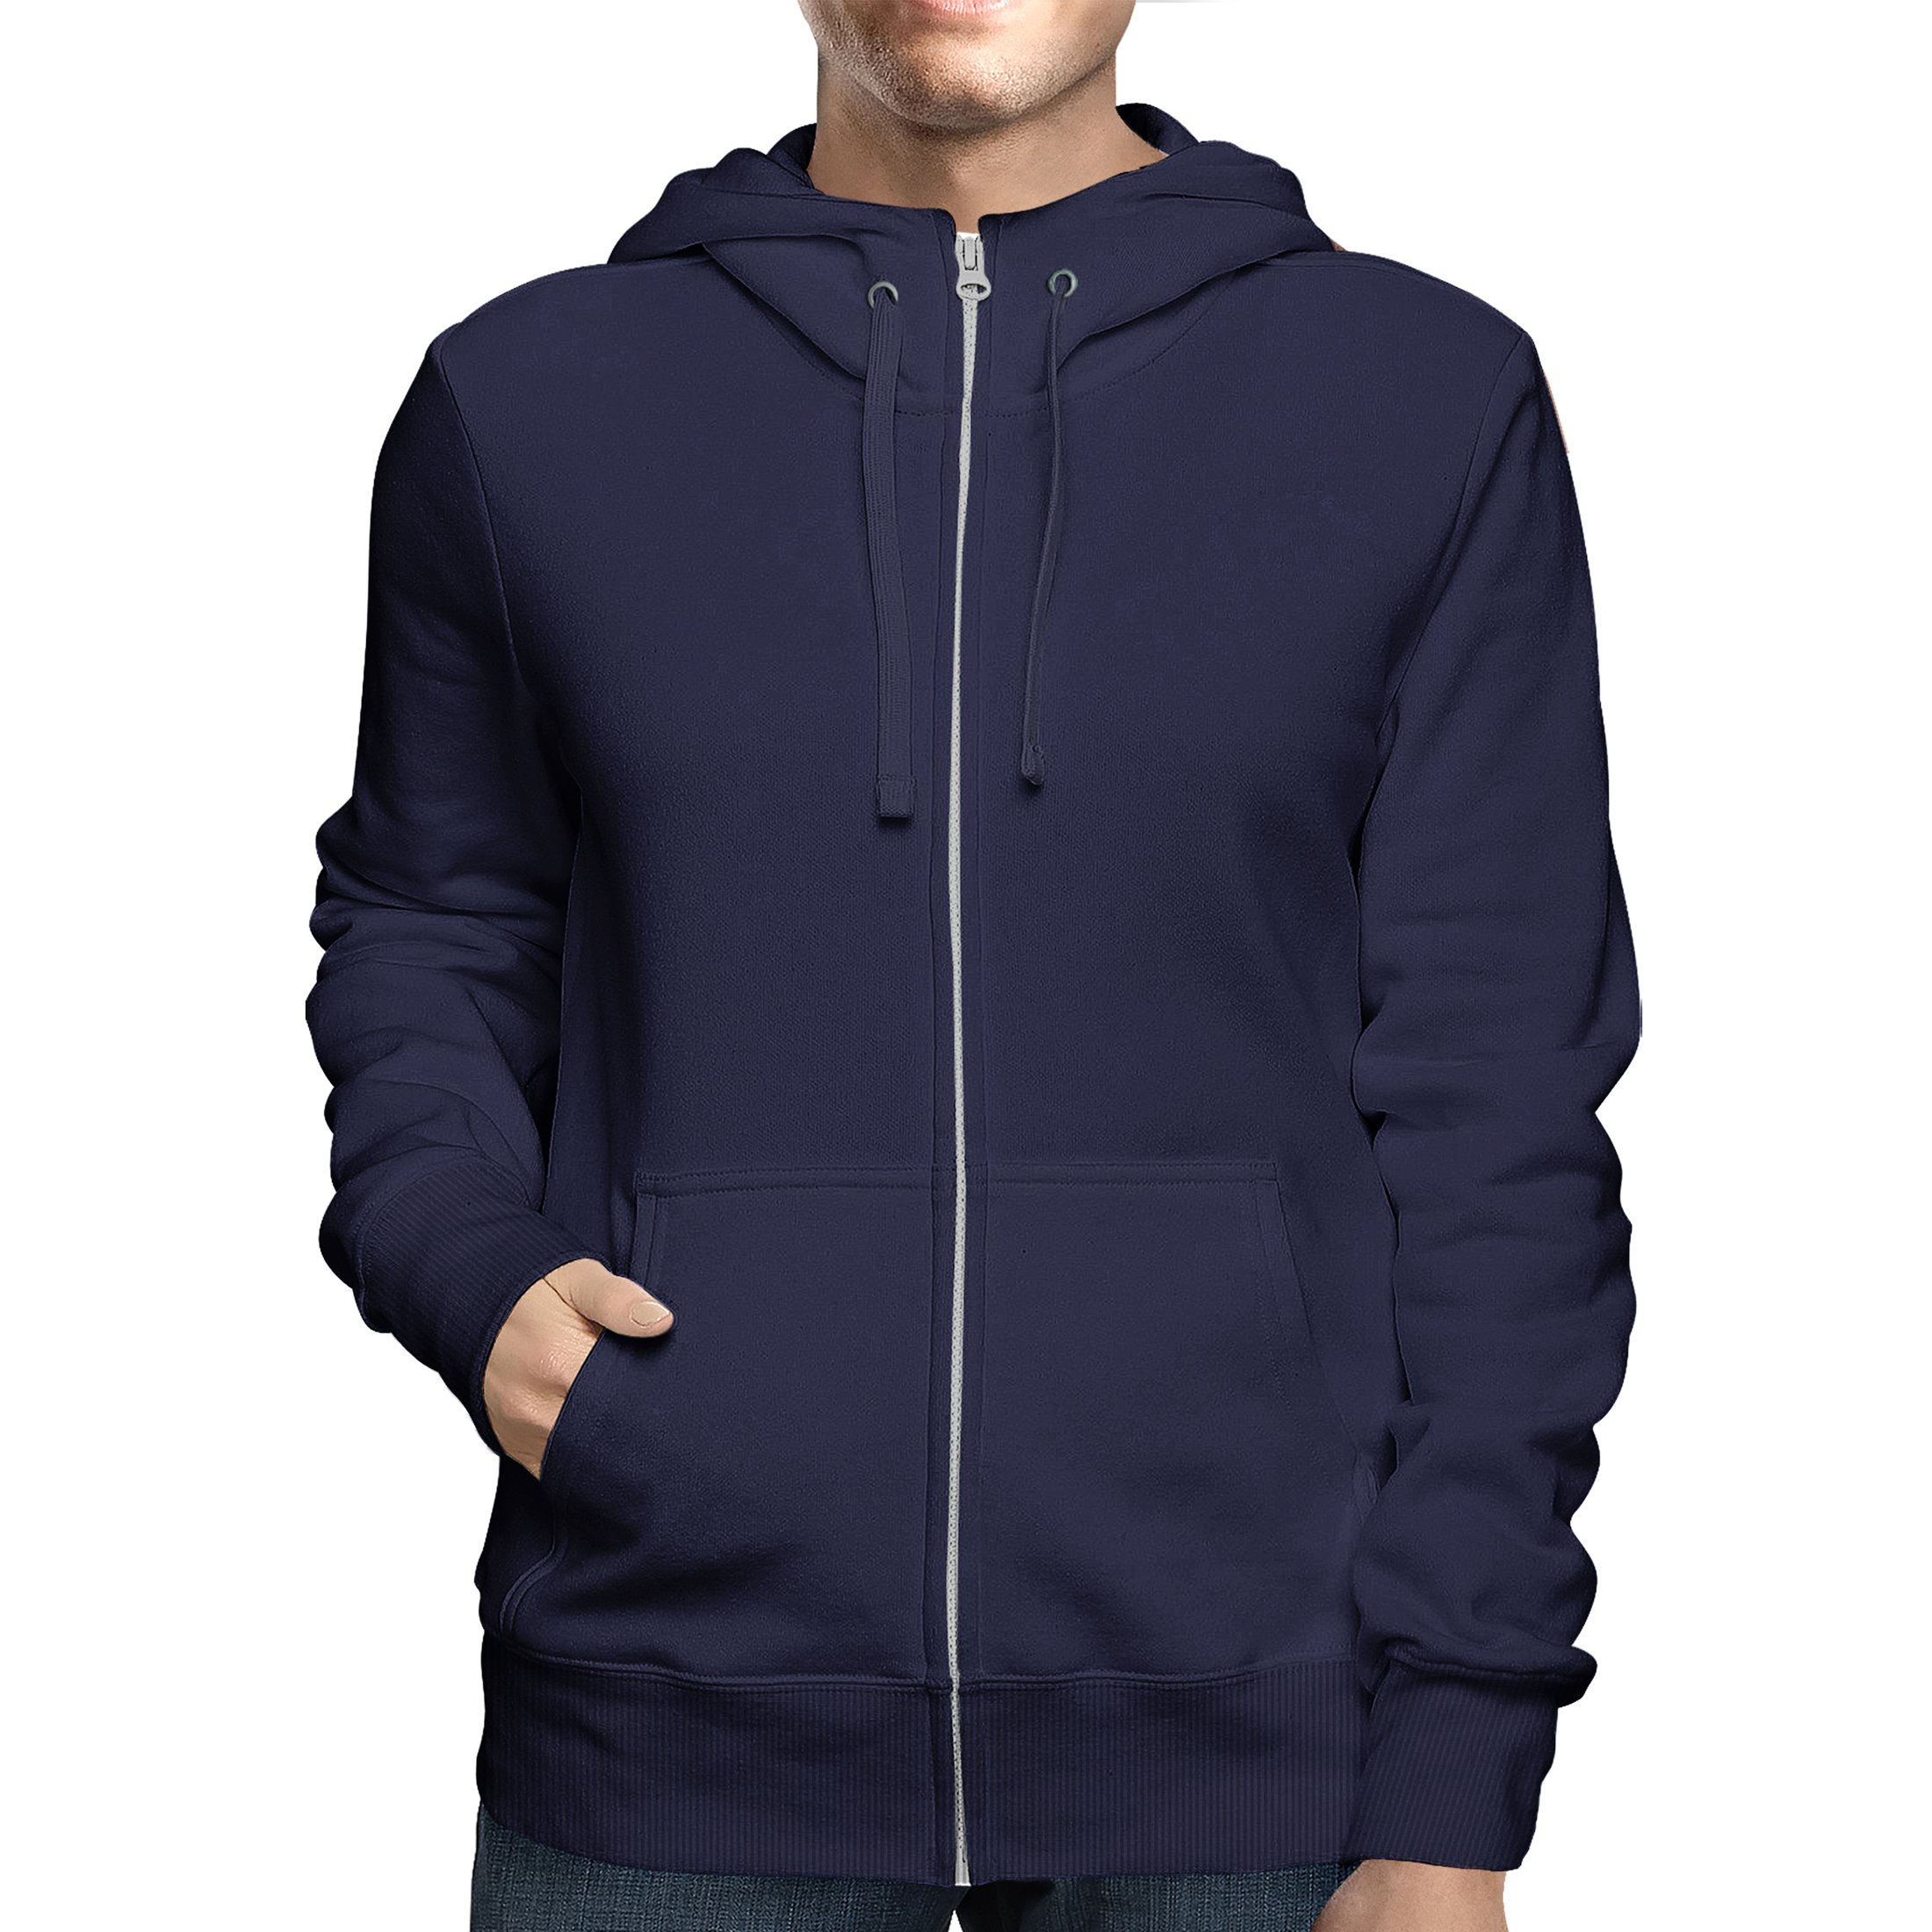 2-Pack: Men's Full Zip Up Fleece-Lined Hoodie Sweatshirt (Big & Tall Size Available) - Navy, 2x-large